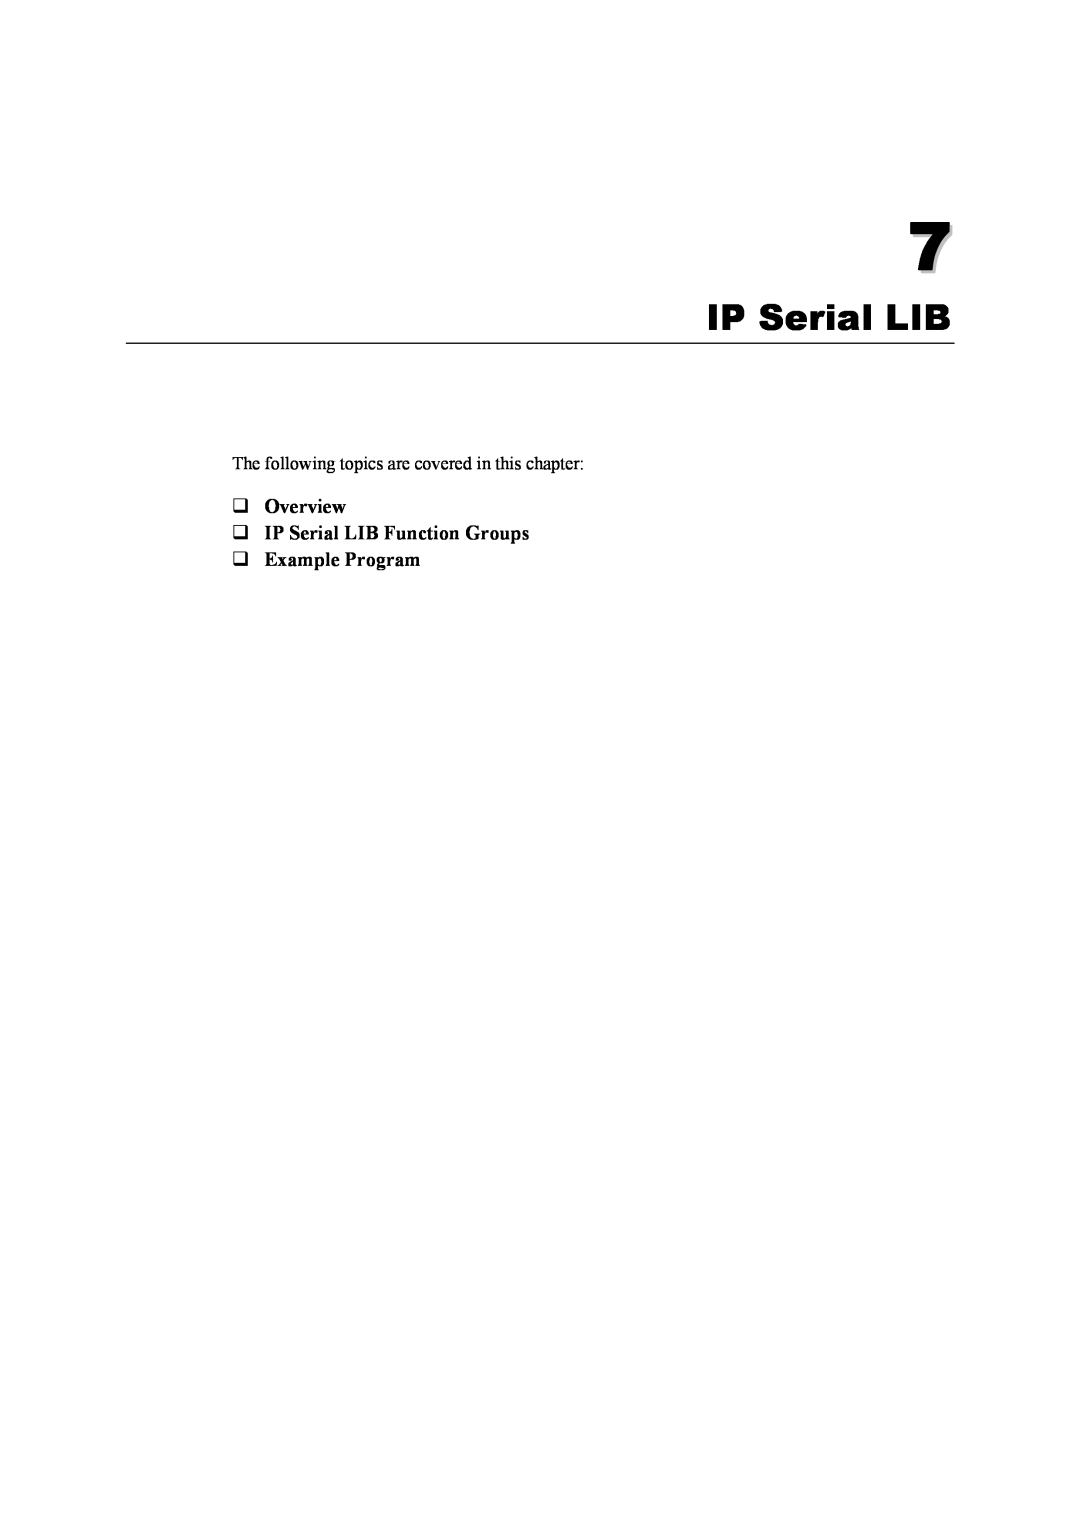 Moxa Technologies 5400 Series user manual ‰ Overview ‰ IP Serial LIB Function Groups ‰ Example Program 